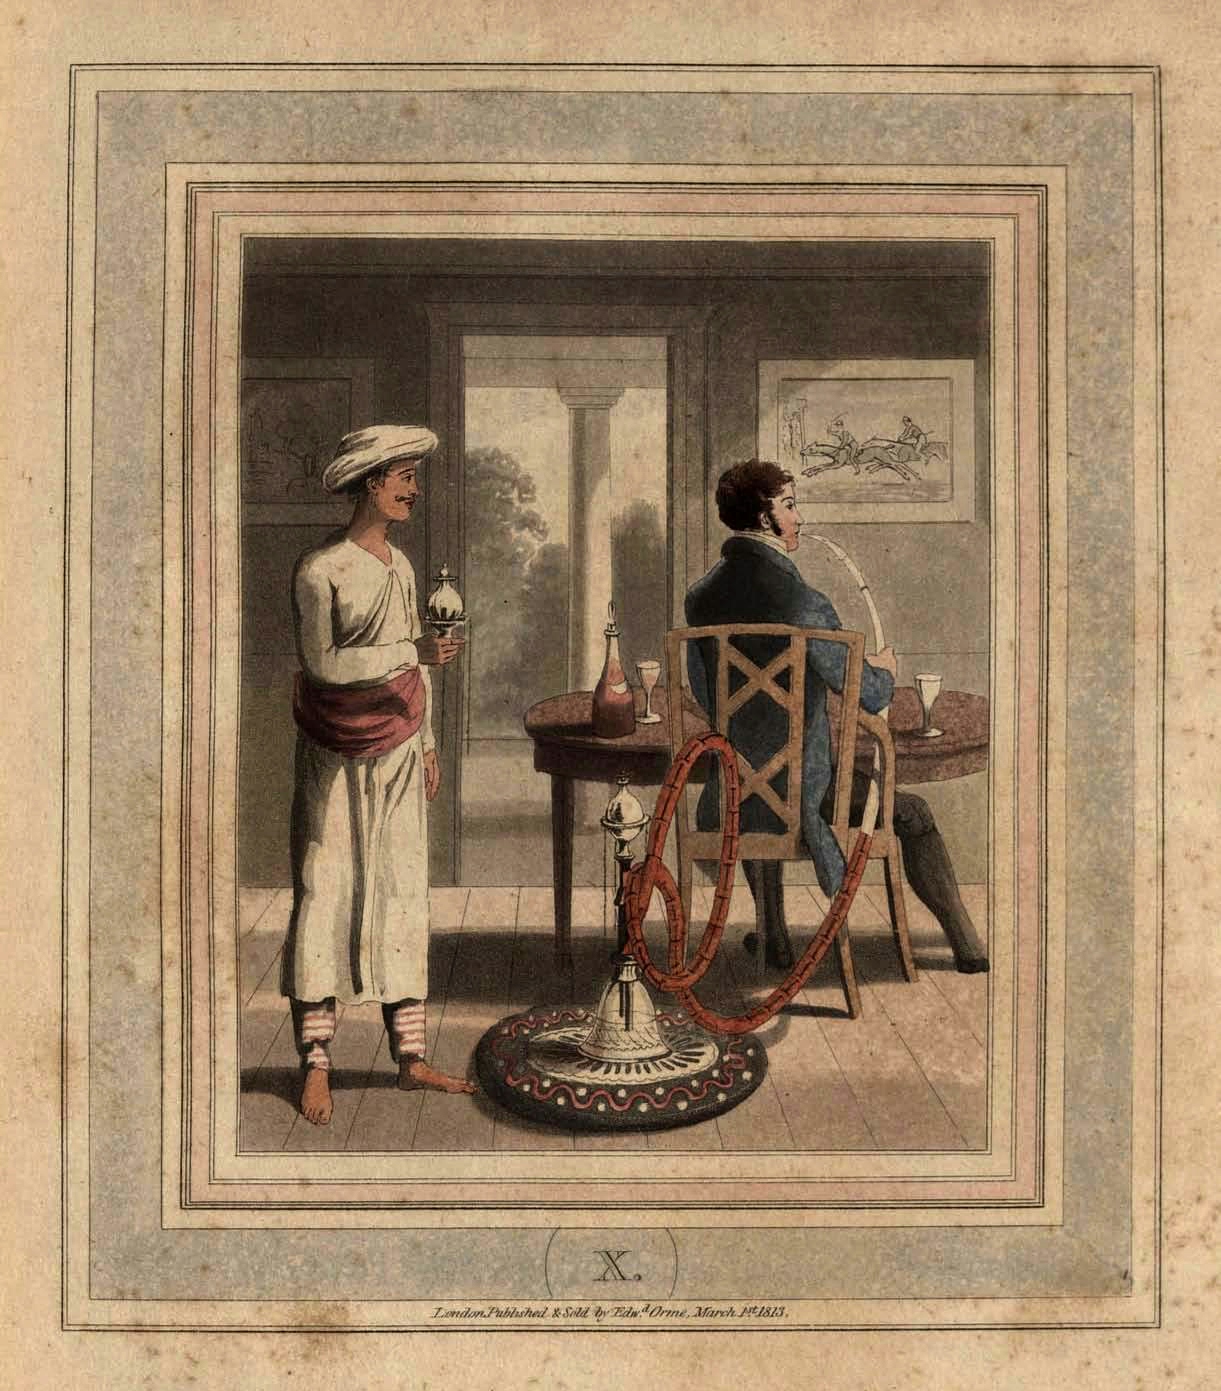 A European man sat at a table with his back to the viewer. He smokes a large hookah which is on the floor behind him, along with his Indian hookah baradur